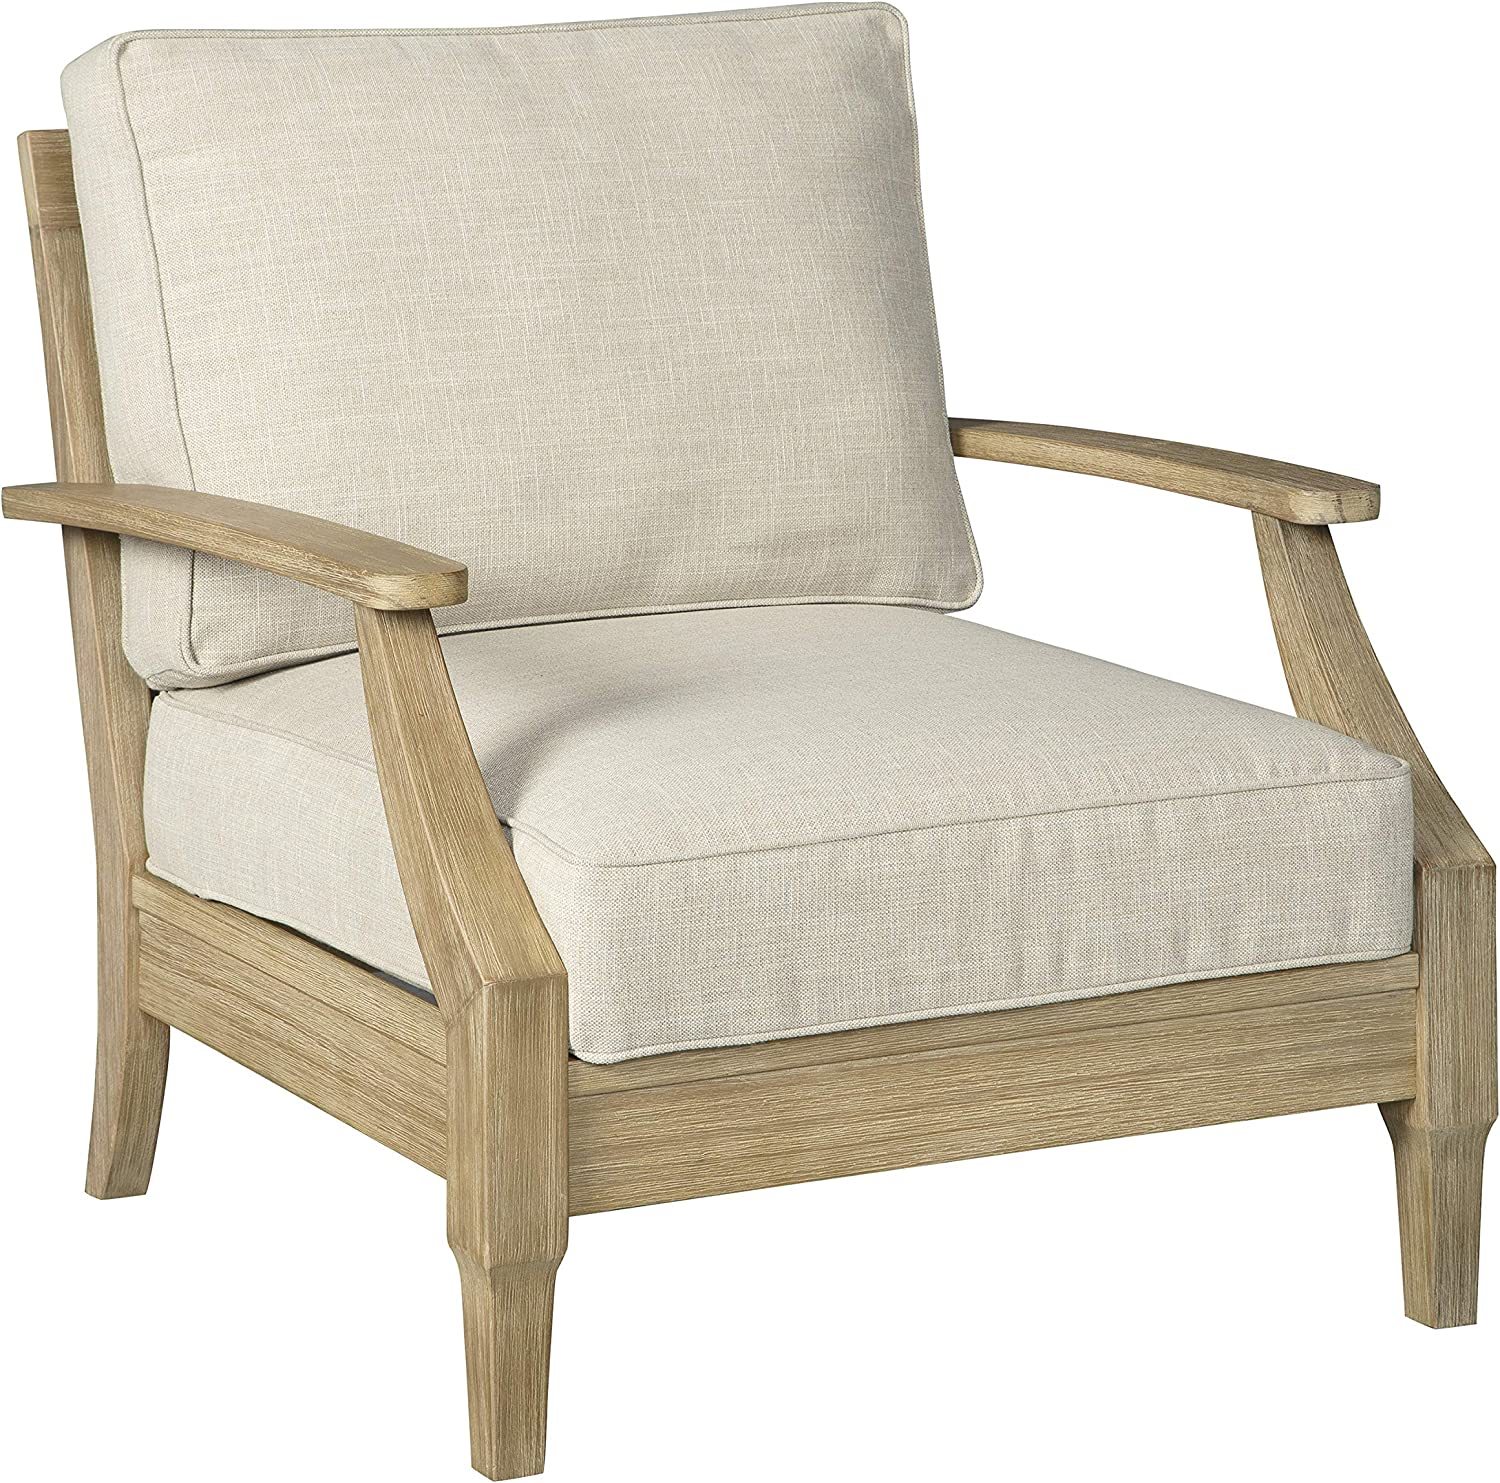 Beige Clare View Outdoor Single Cushioned Lounge Chair By Ashley Signature - $519.96